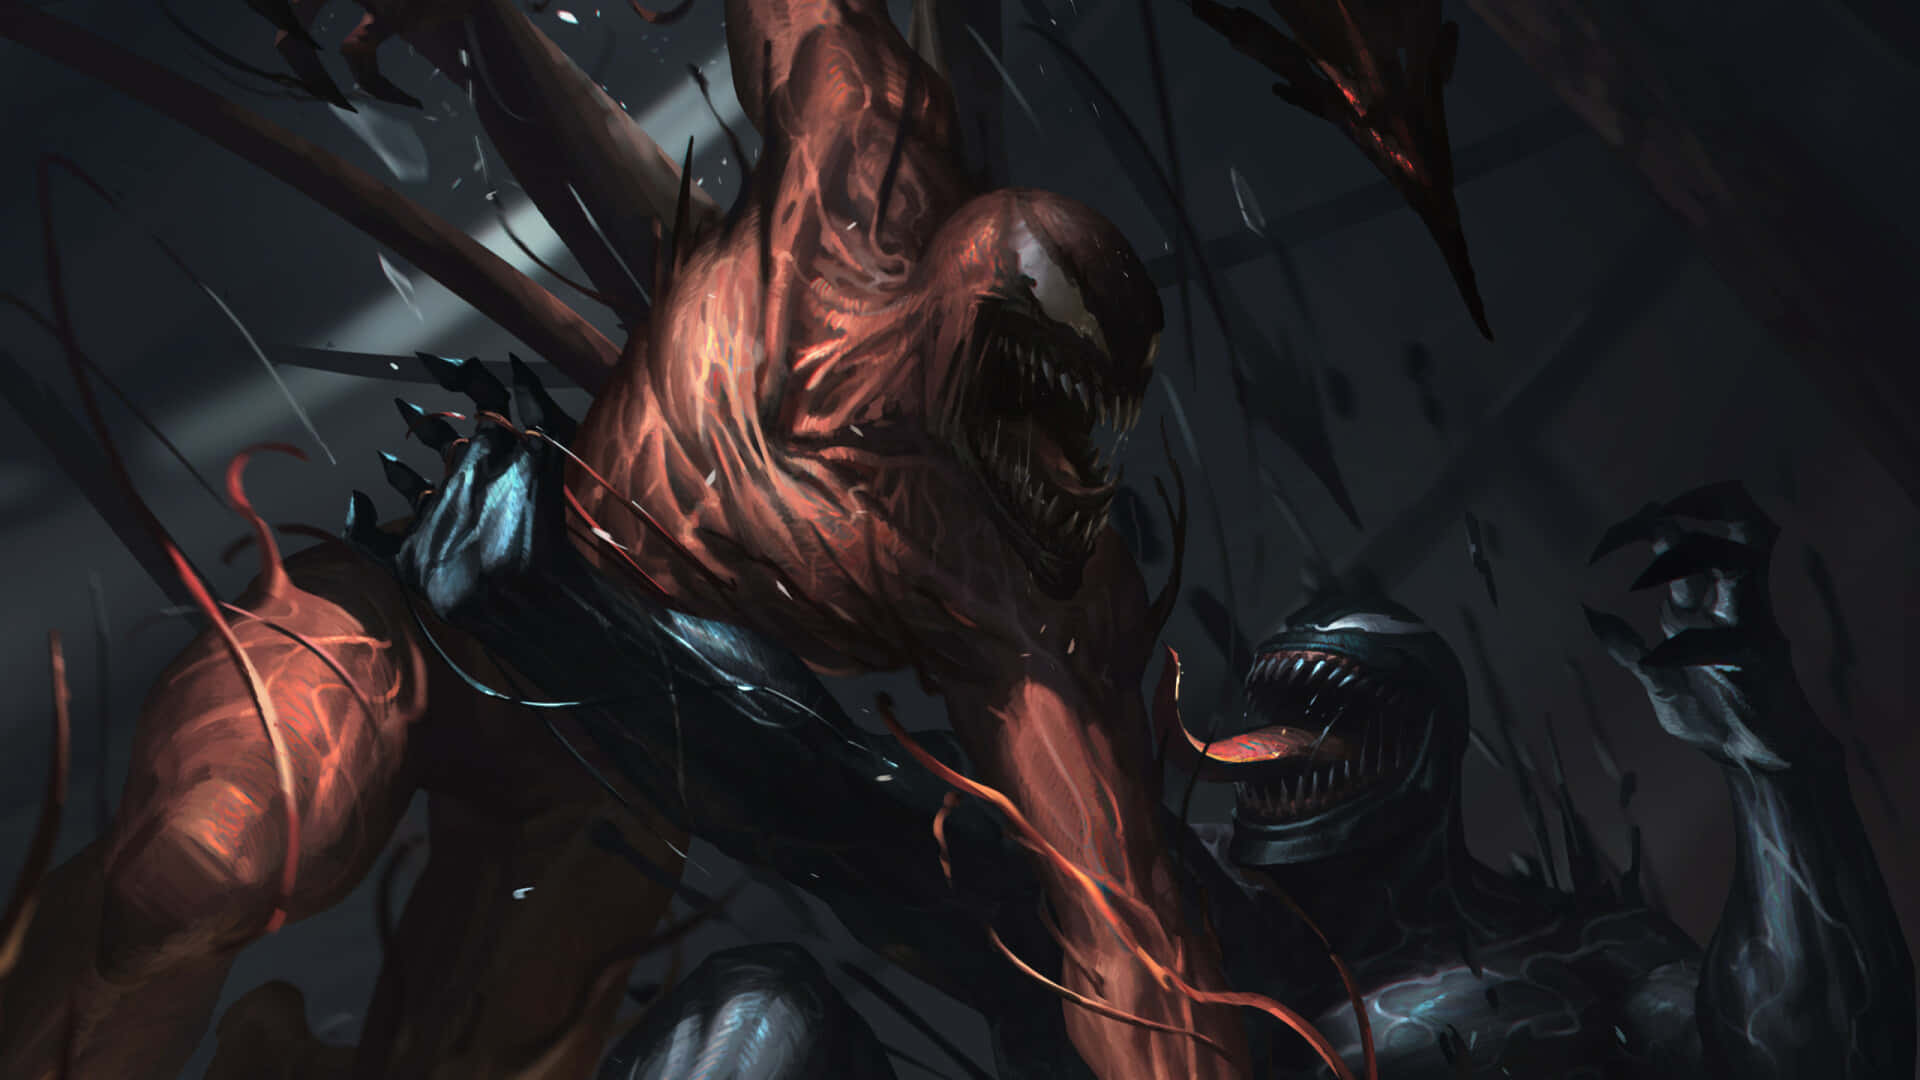 Witness Carnage Unleashed in Marvel's Latest Storyline Wallpaper